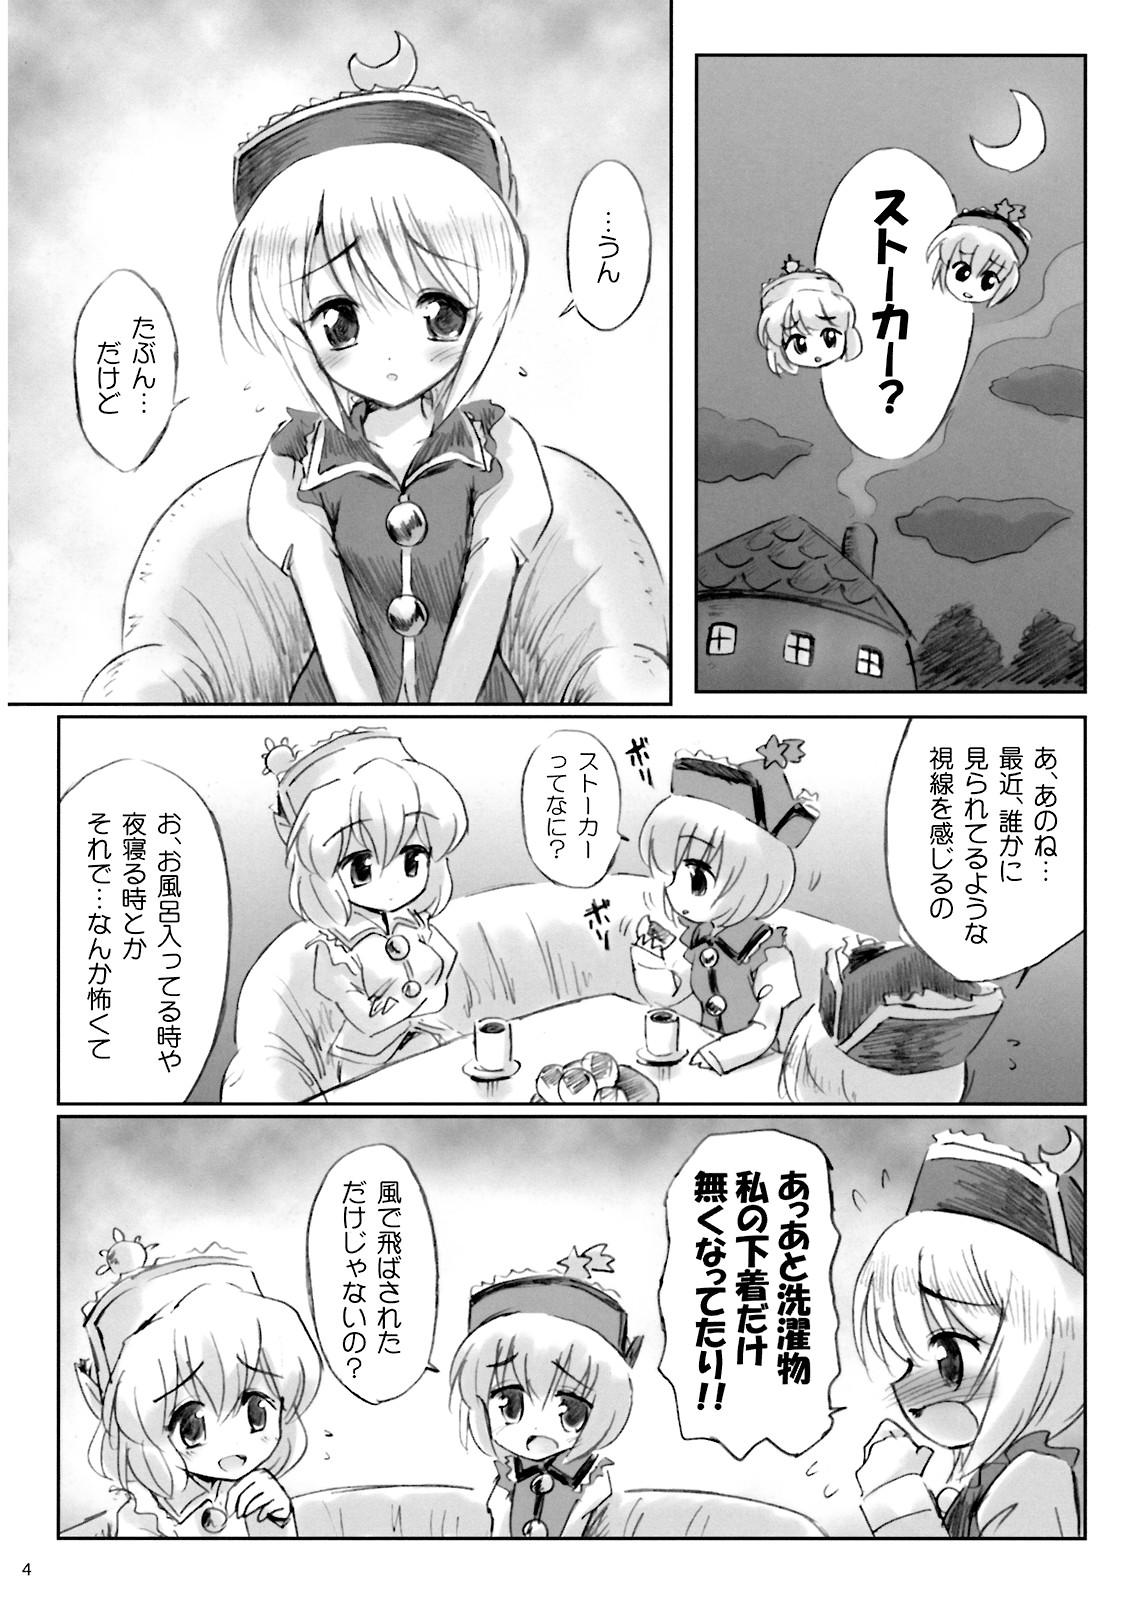 Realamateur IDOLMASTER - Touhou project Fingers - Page 3